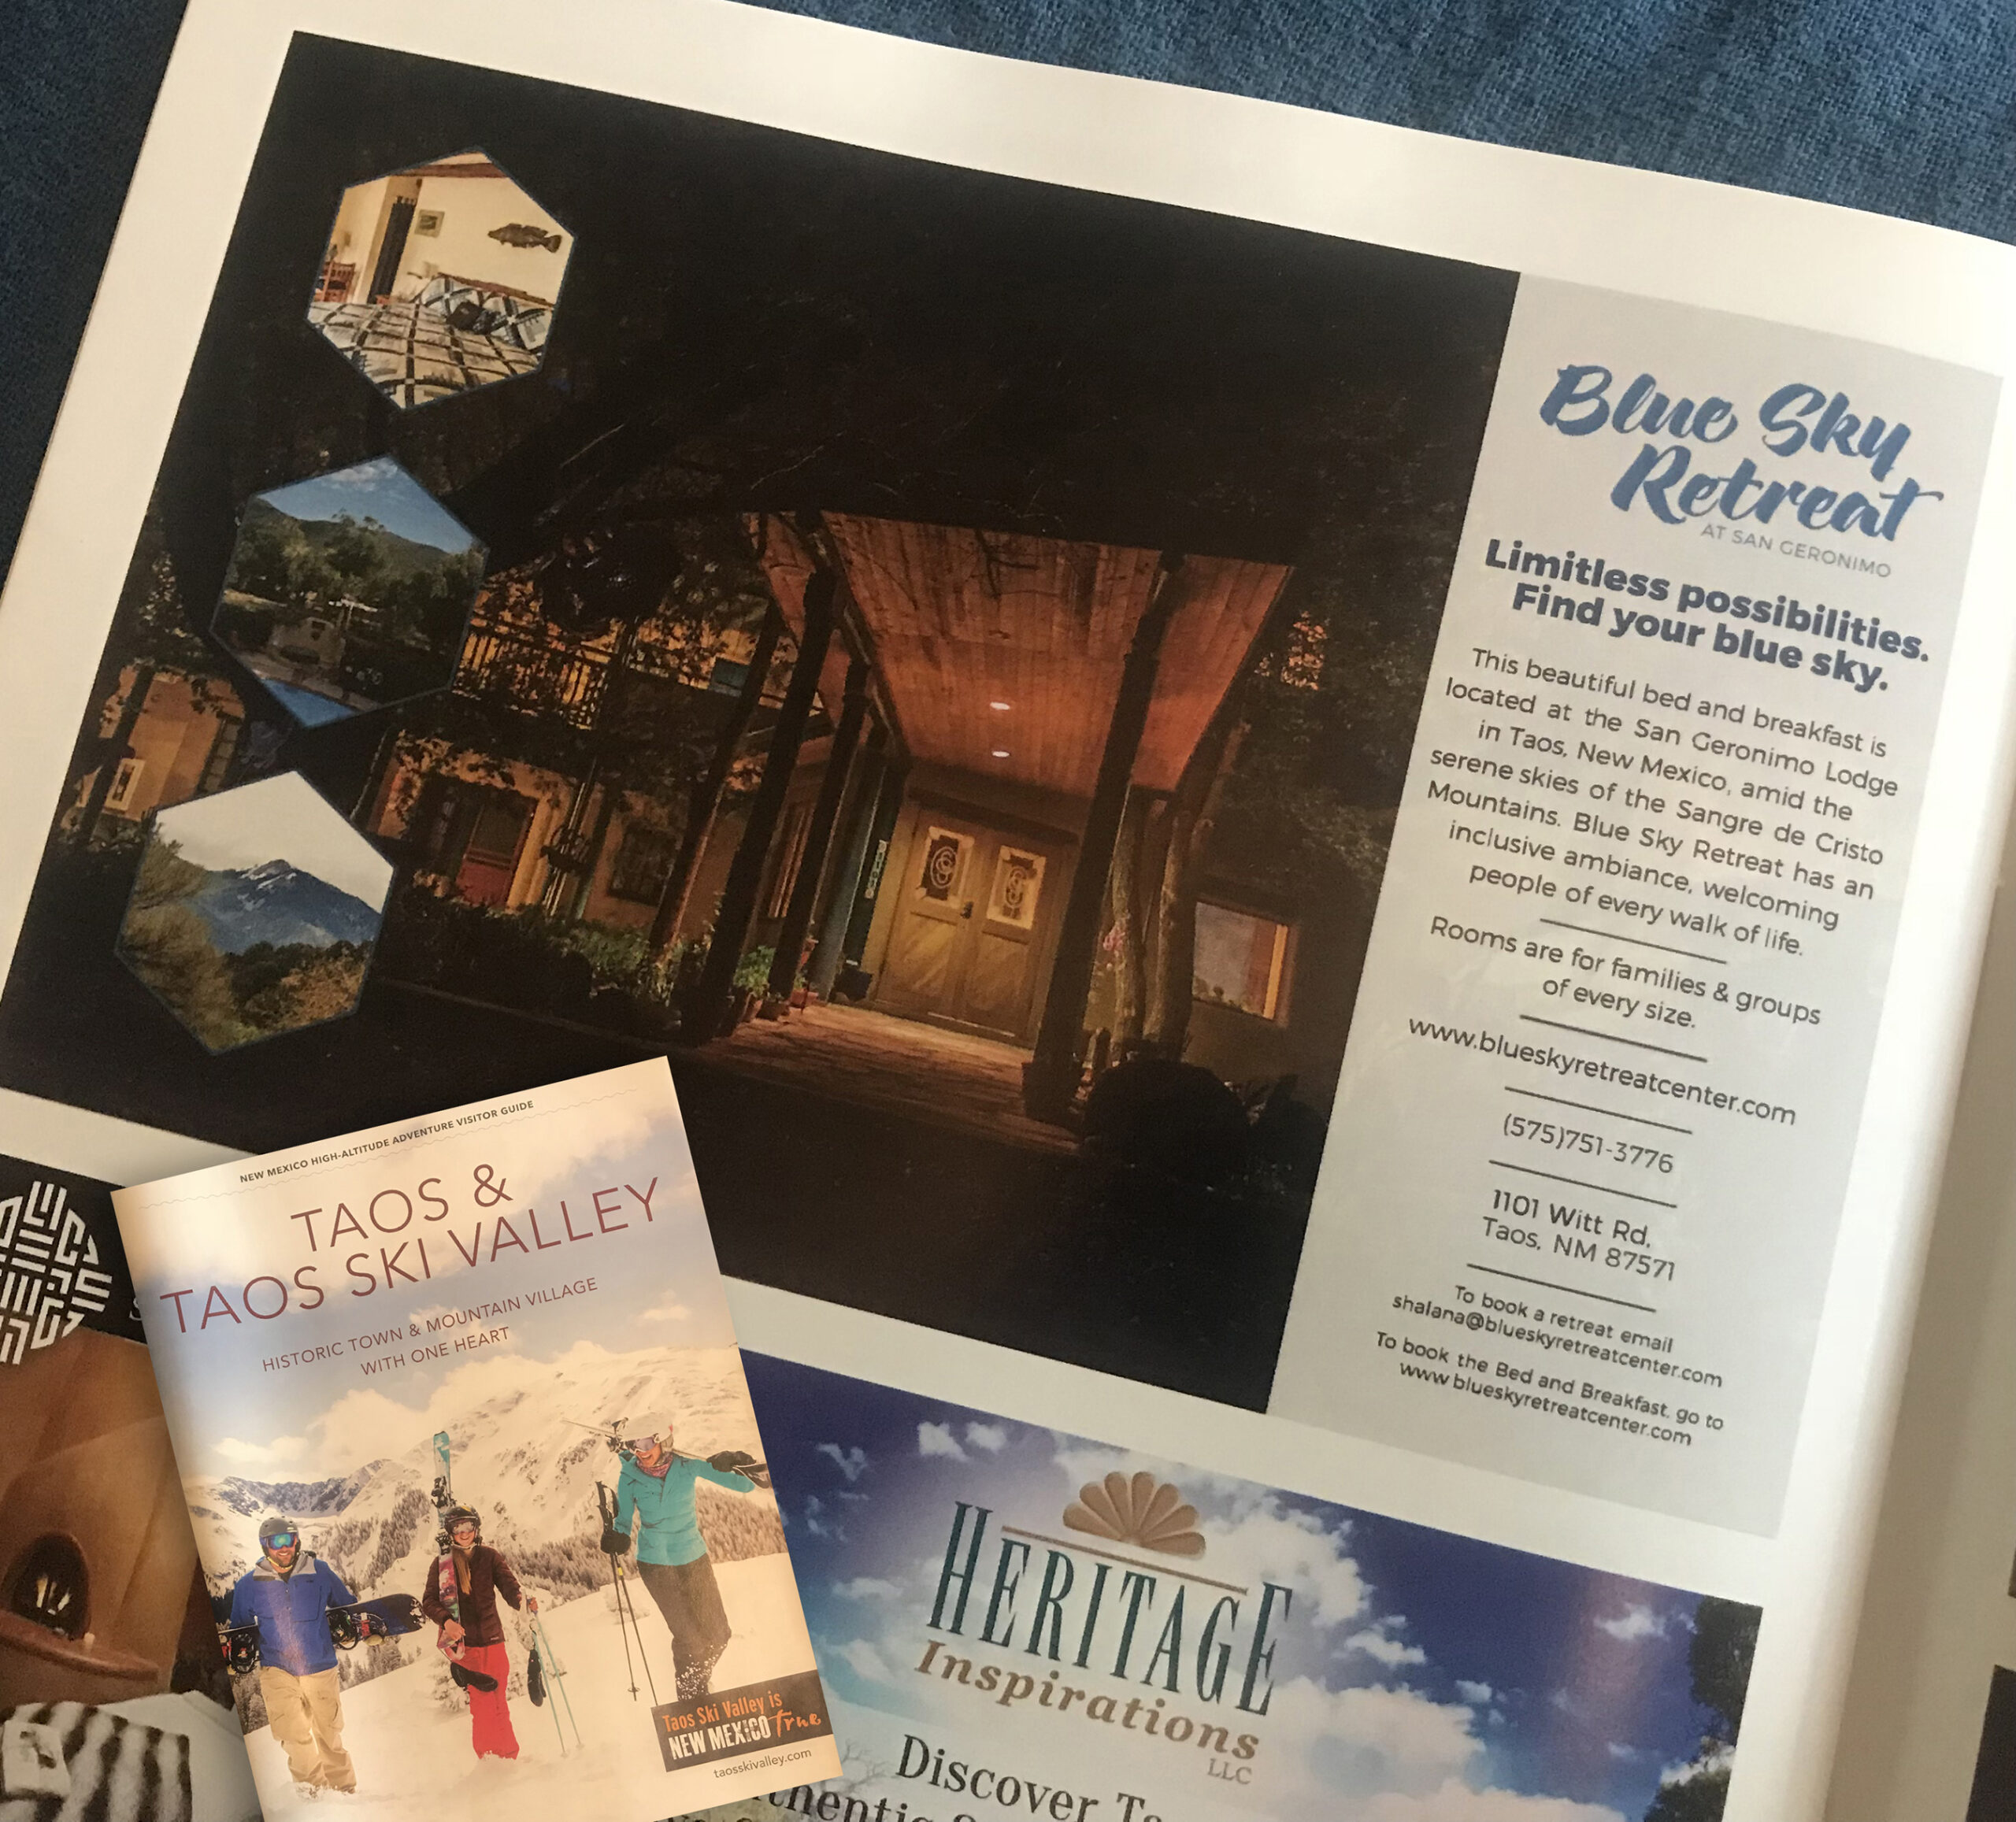 Taos Tourism advertisement photographed and designed for Blue Sky Retreat Center.